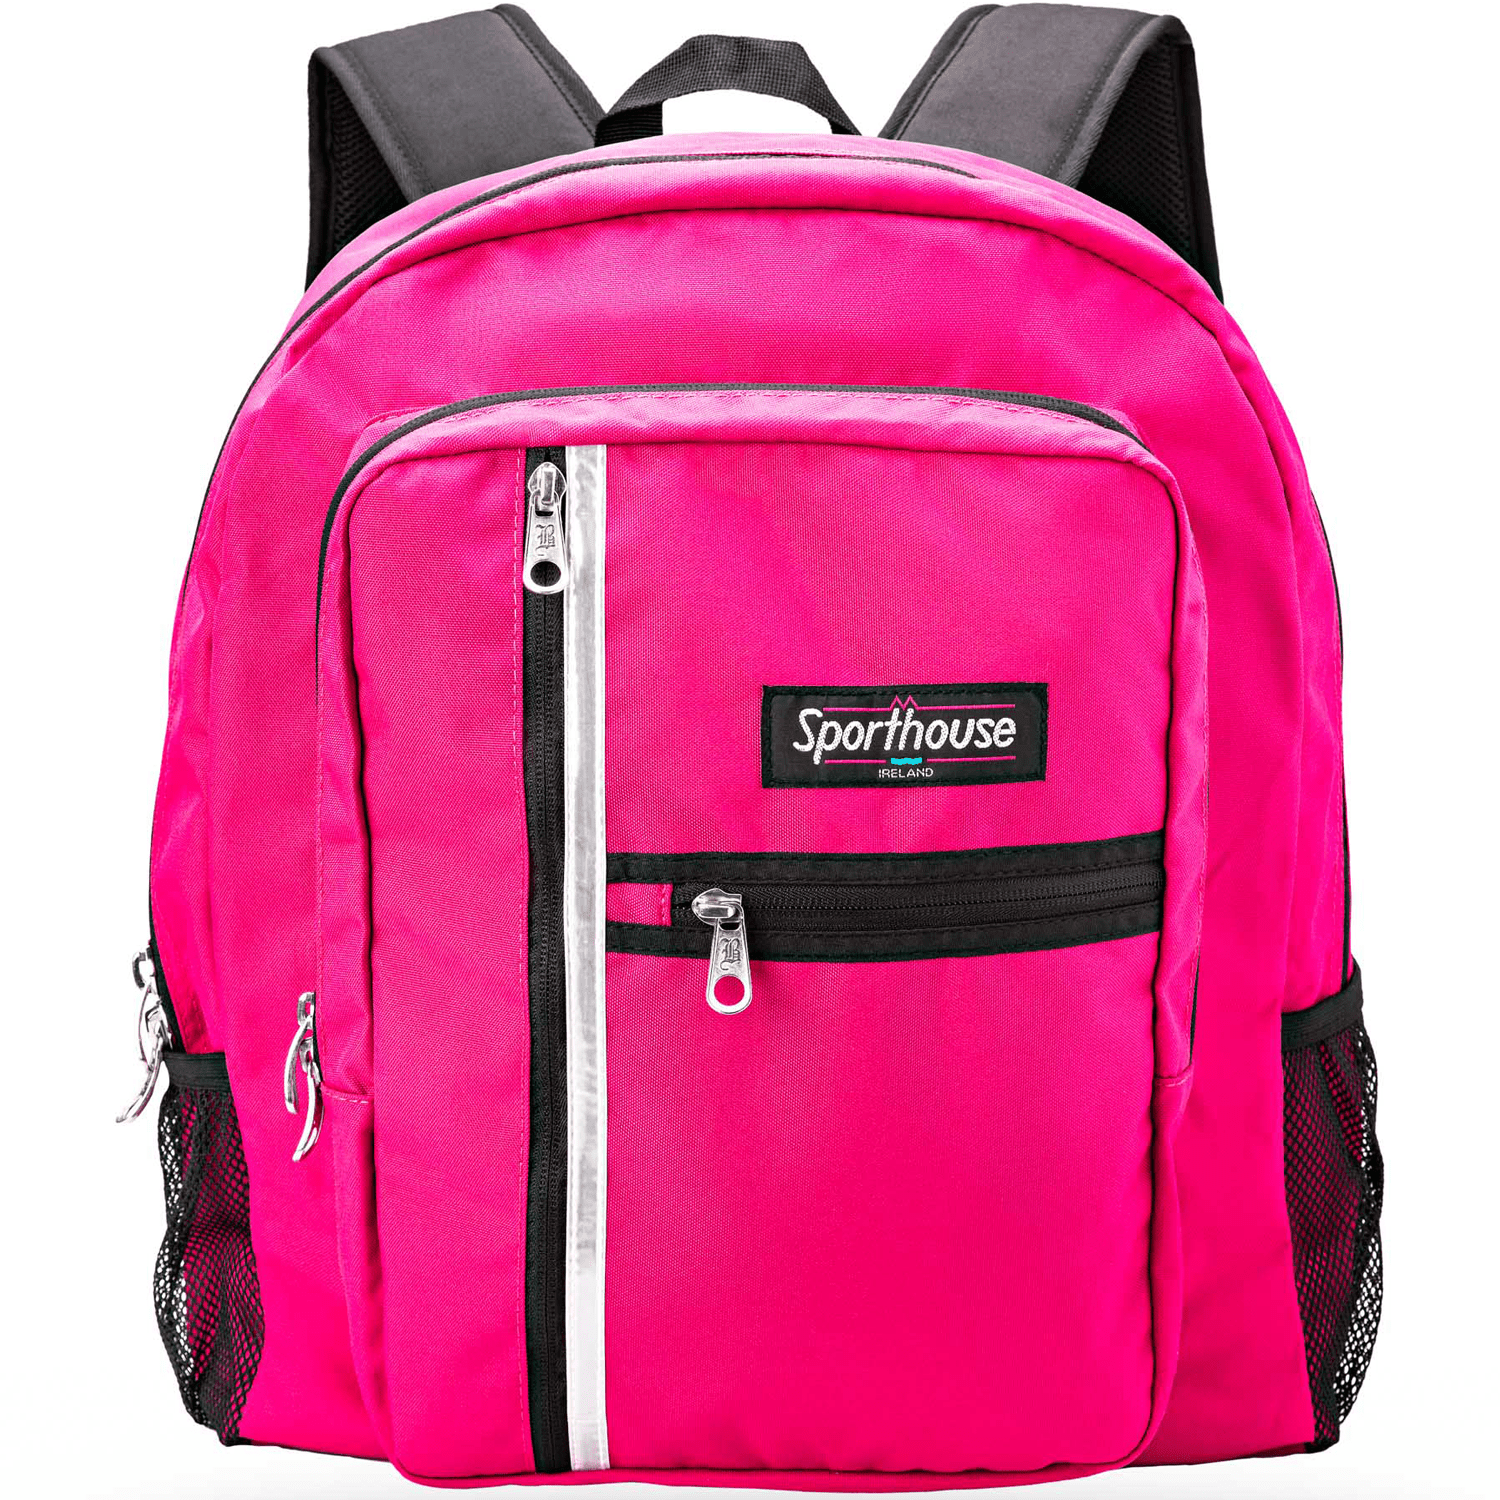 Sporthouse Student 2000 42L Backpack - Pink 1 Shaws Department Stores